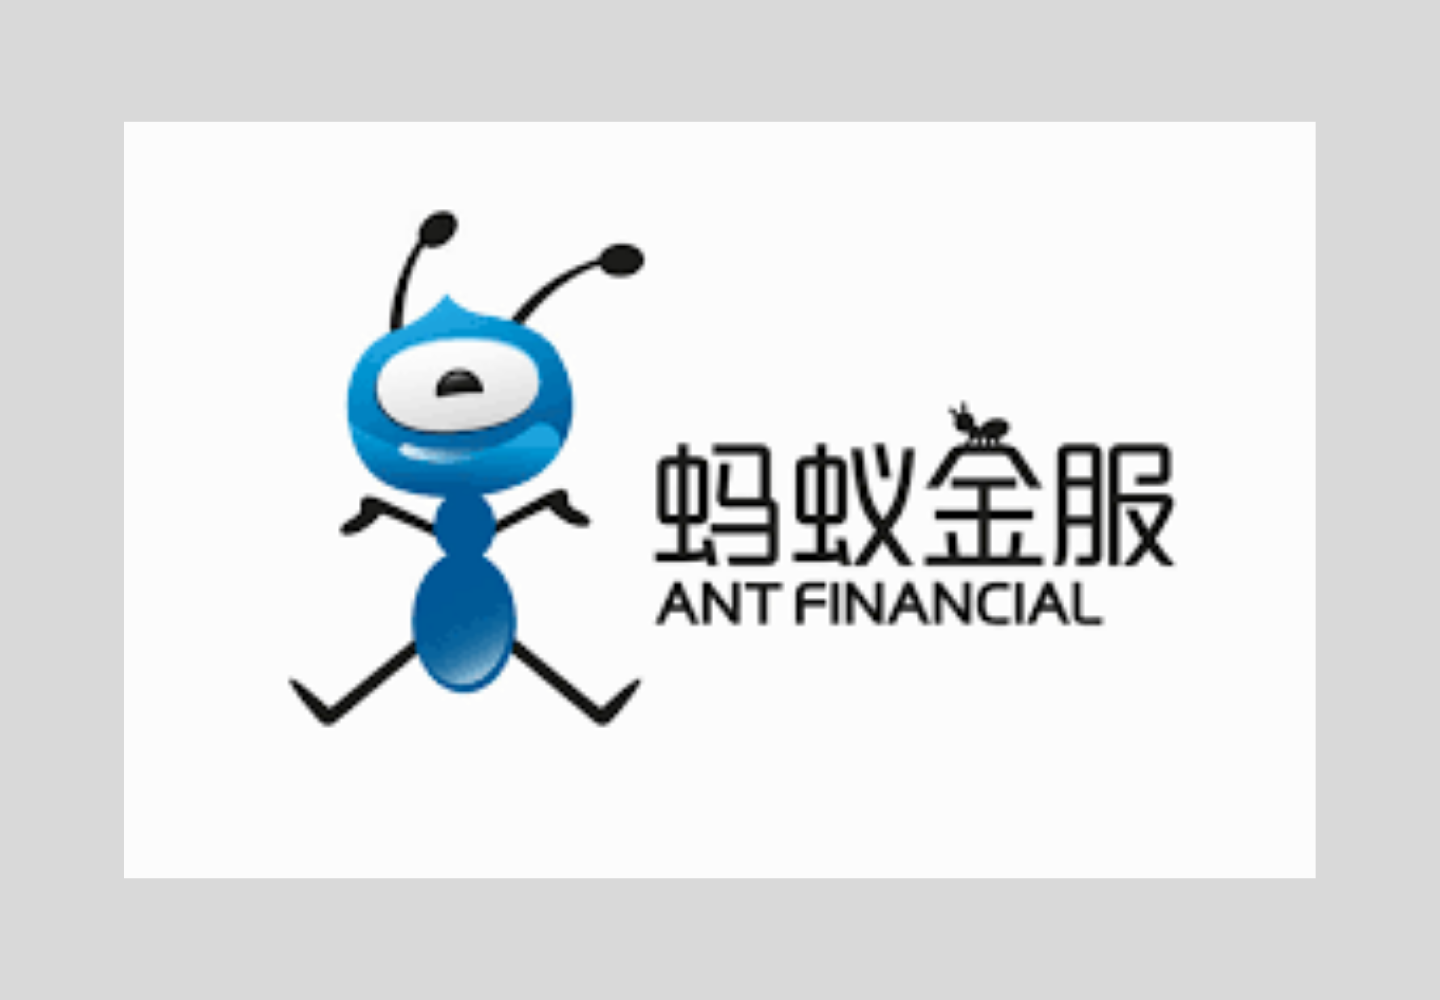 Ant financial ipo share price renren ipo valuation